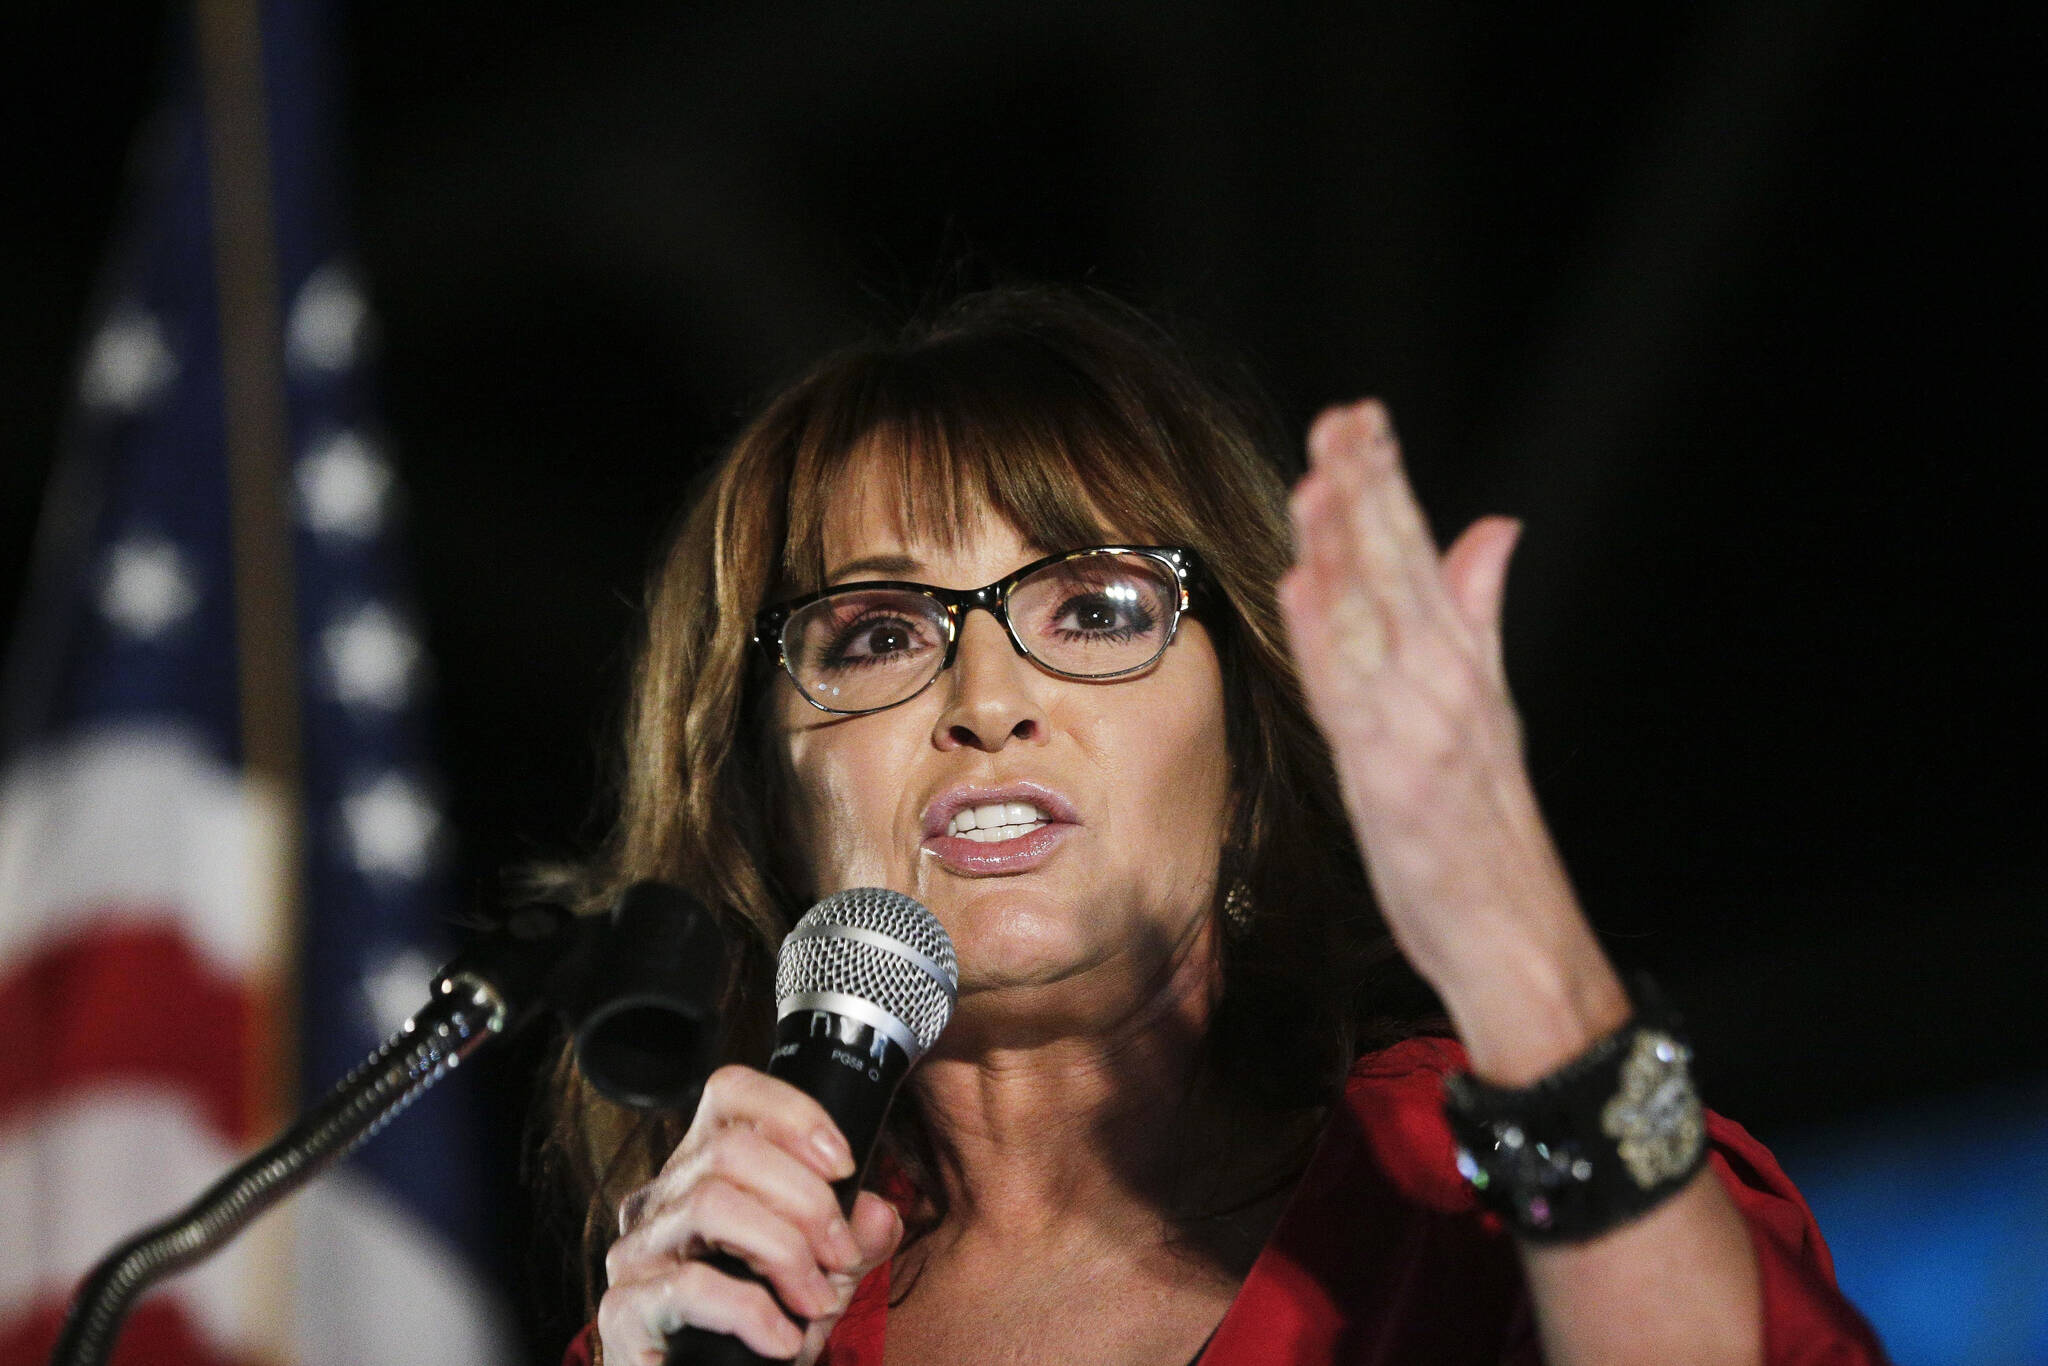 In this Sept. 21, 2017, file photo, former vice presidential candidate Sarah Palin speaks at a rally in Montgomery, Ala. Palin is on the verge of making new headlines in a legal battle with The New York Times. A defamation lawsuit against the Times, brought by the brash former Alaska governor in 2017, is set to go to trial starting Monday, Jan. 24, 2022 in federal court in Manhattan. (AP Photo/Brynn Anderson, File)